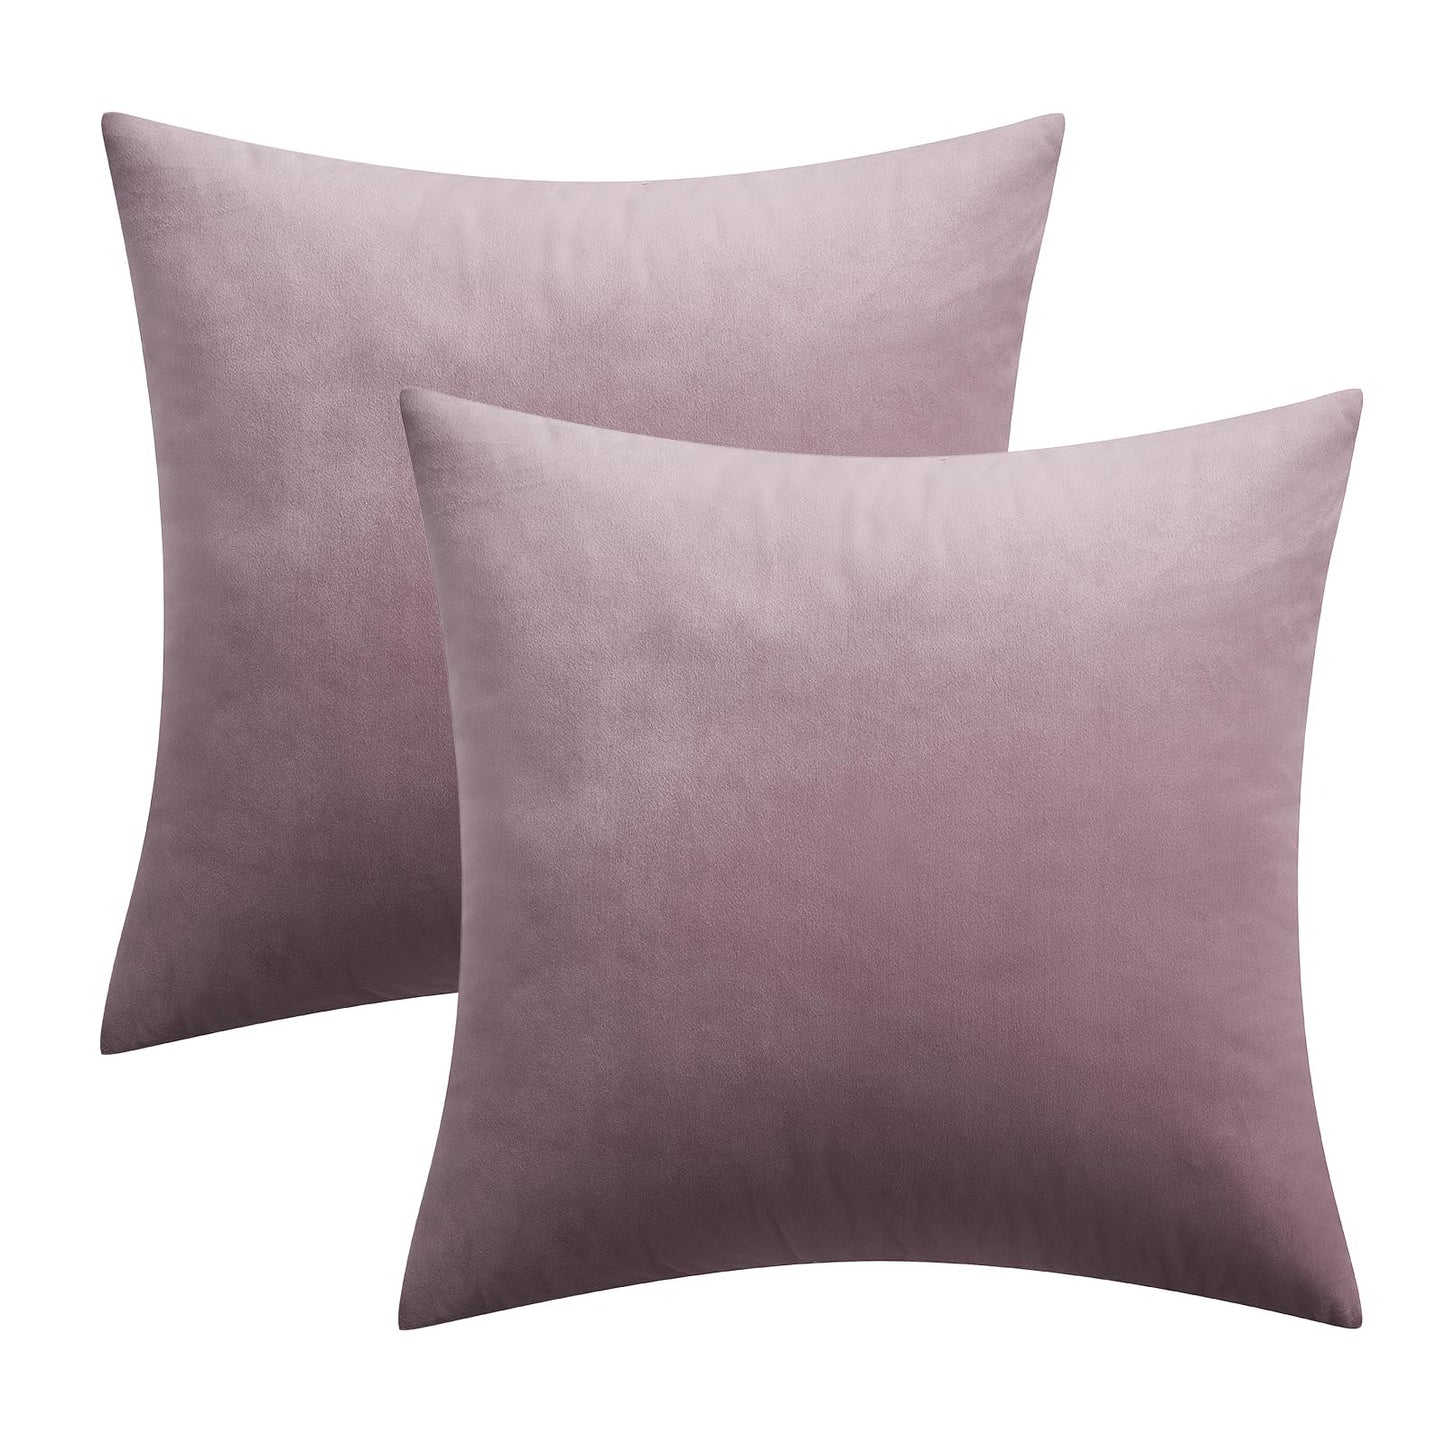 MIULEE Pack of 2, Velvet Soft Solid Decorative Square Throw Pillow Covers Set Cushion Cases Pillowcases for Spring Sofa Bedroom Car18x18 Inch 45x45 cm